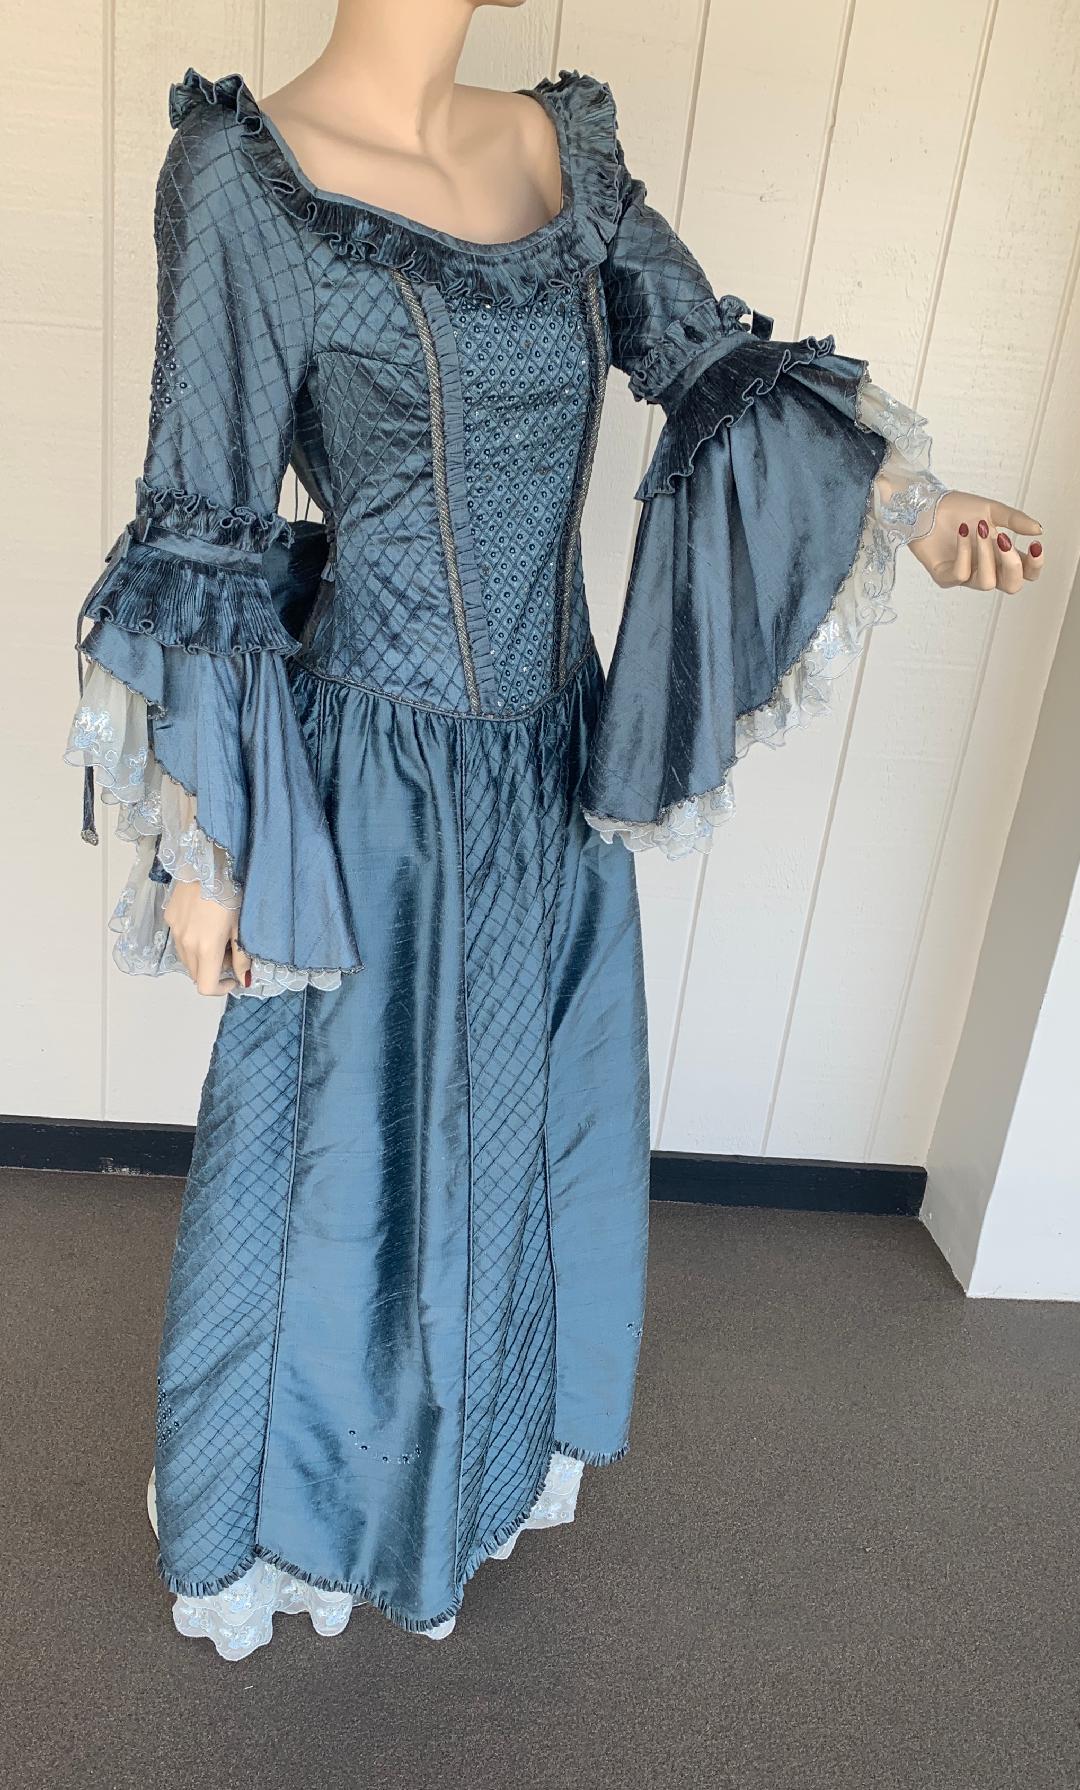 Fine quality, custom made, Marie Antoinette style ballroom evening gown or long dress is exquisitely made out of a rich blue gray colored raw silk or silk noil and has a somewhat rough texture (characteristic of this type of silk) and a graceful